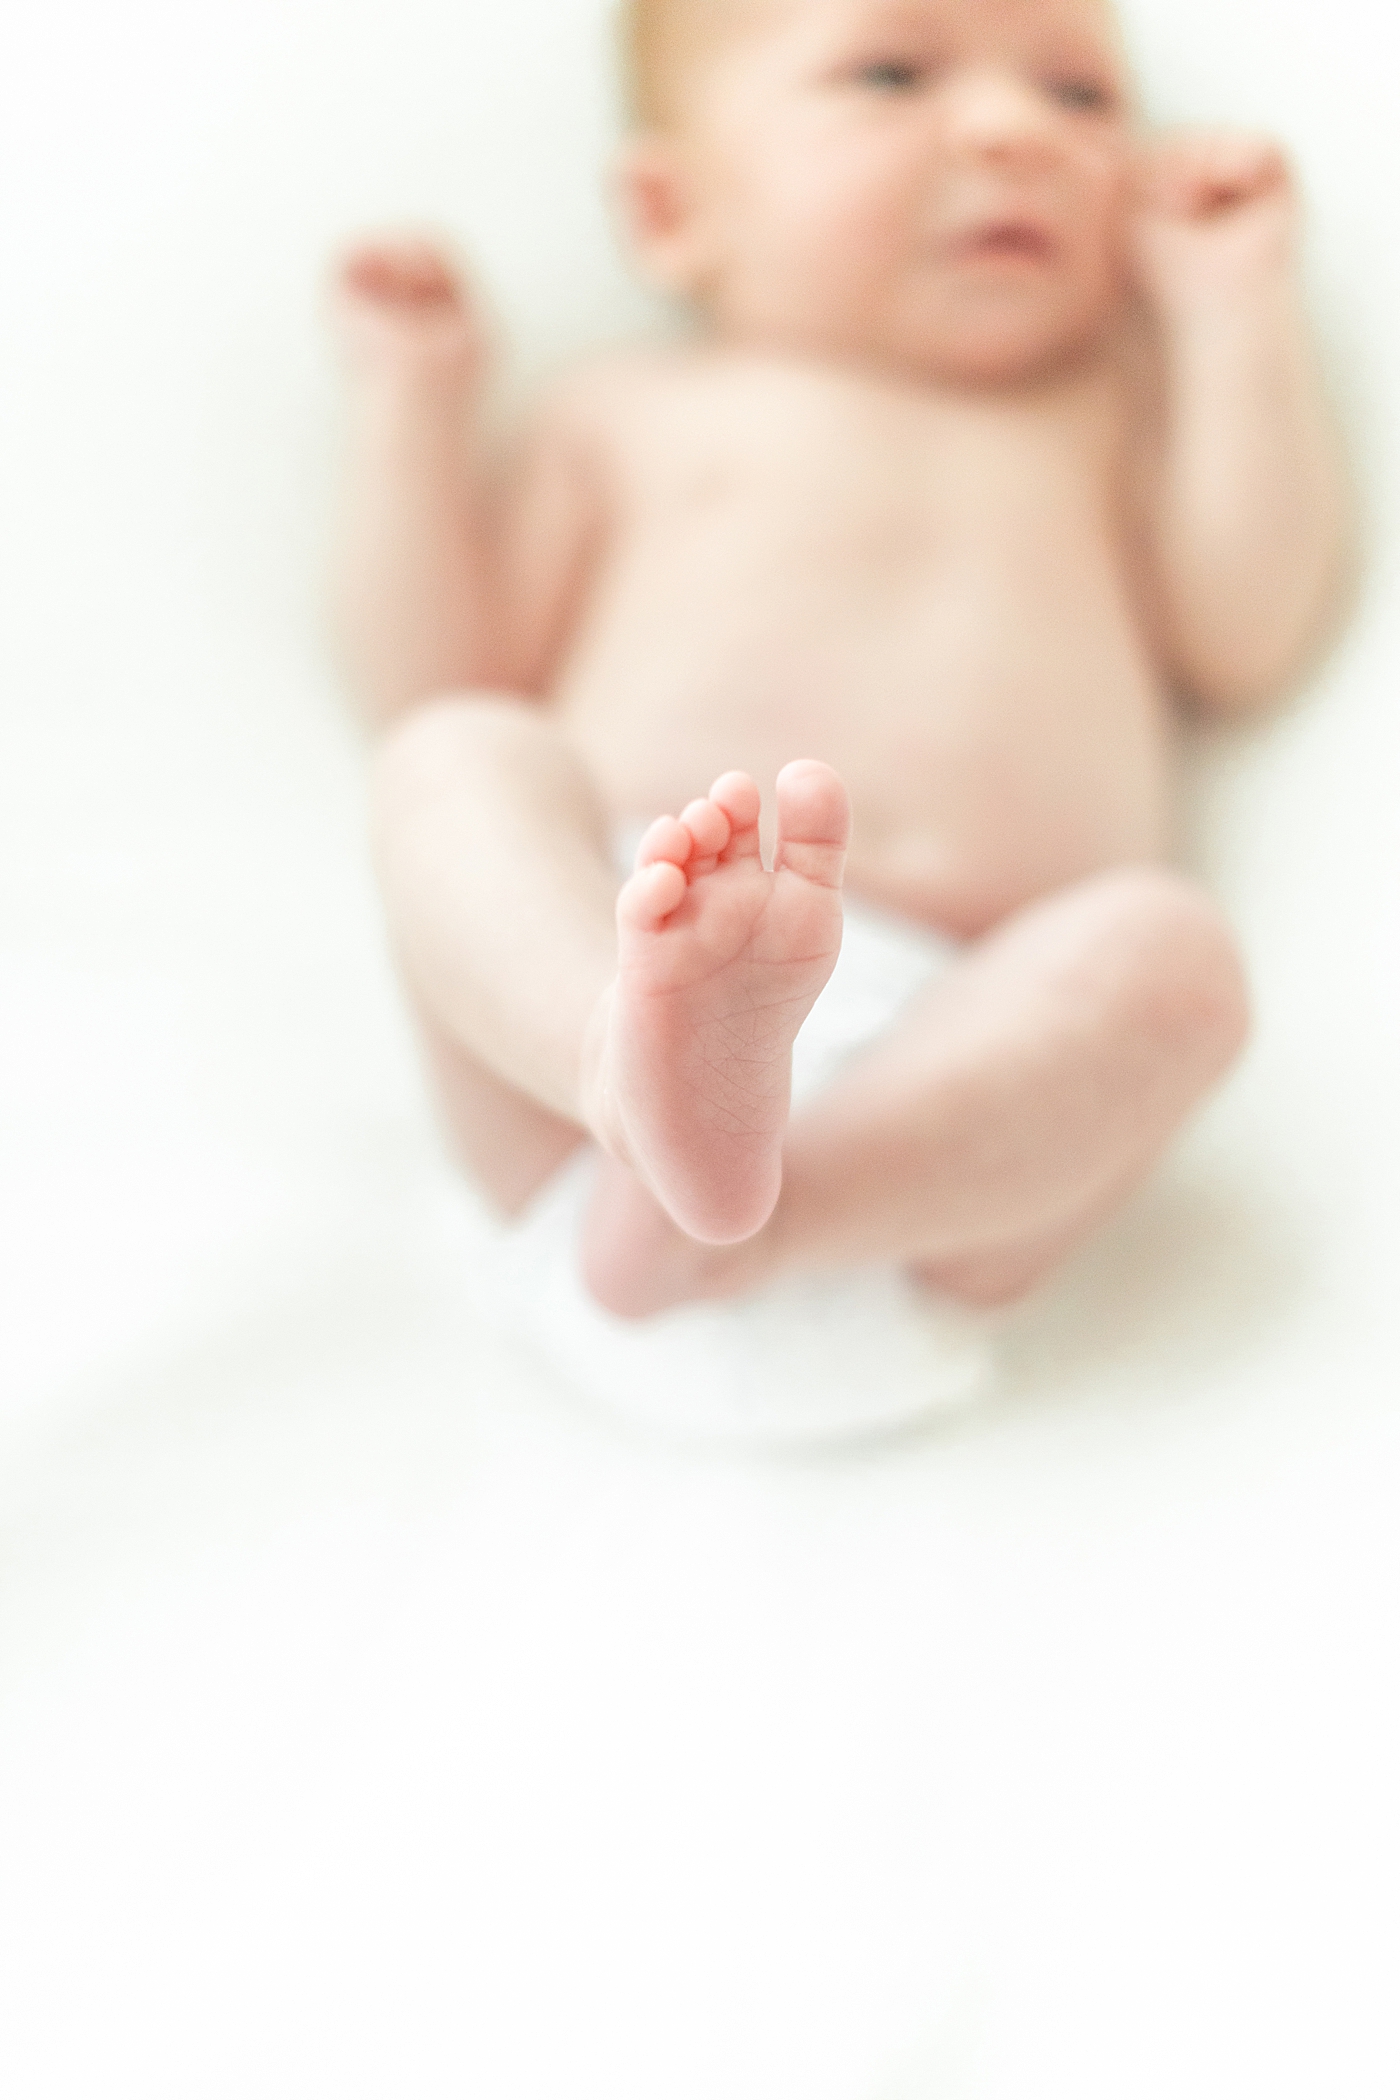 | Image by Mooresville Newborn Photographer Chrissy Winchester